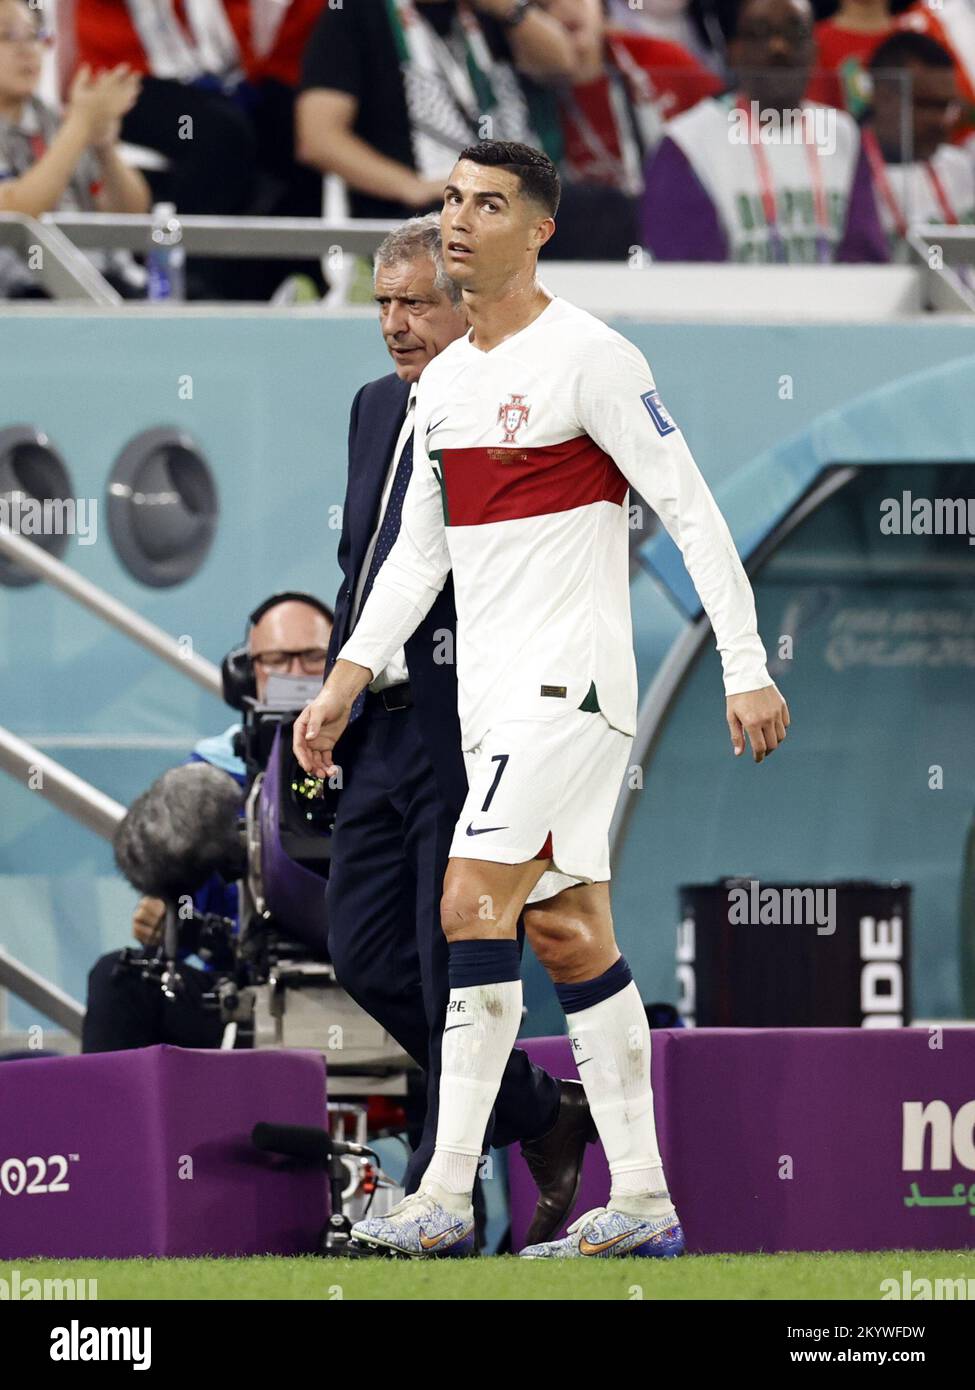 Qatar. 02nd Dec, 2022. DOHA - (l-r) coach Fernando Santos of Portugal, Cristiano Ronaldo of Portugal during the FIFA World Cup Qatar 2022 group H match between South Korea and Portugal at Education City Stadium on December 2, 2022 in Doha, Qatar. AP | Dutch Height | MAURICE OF STONE Credit: ANP/Alamy Live News Stock Photo